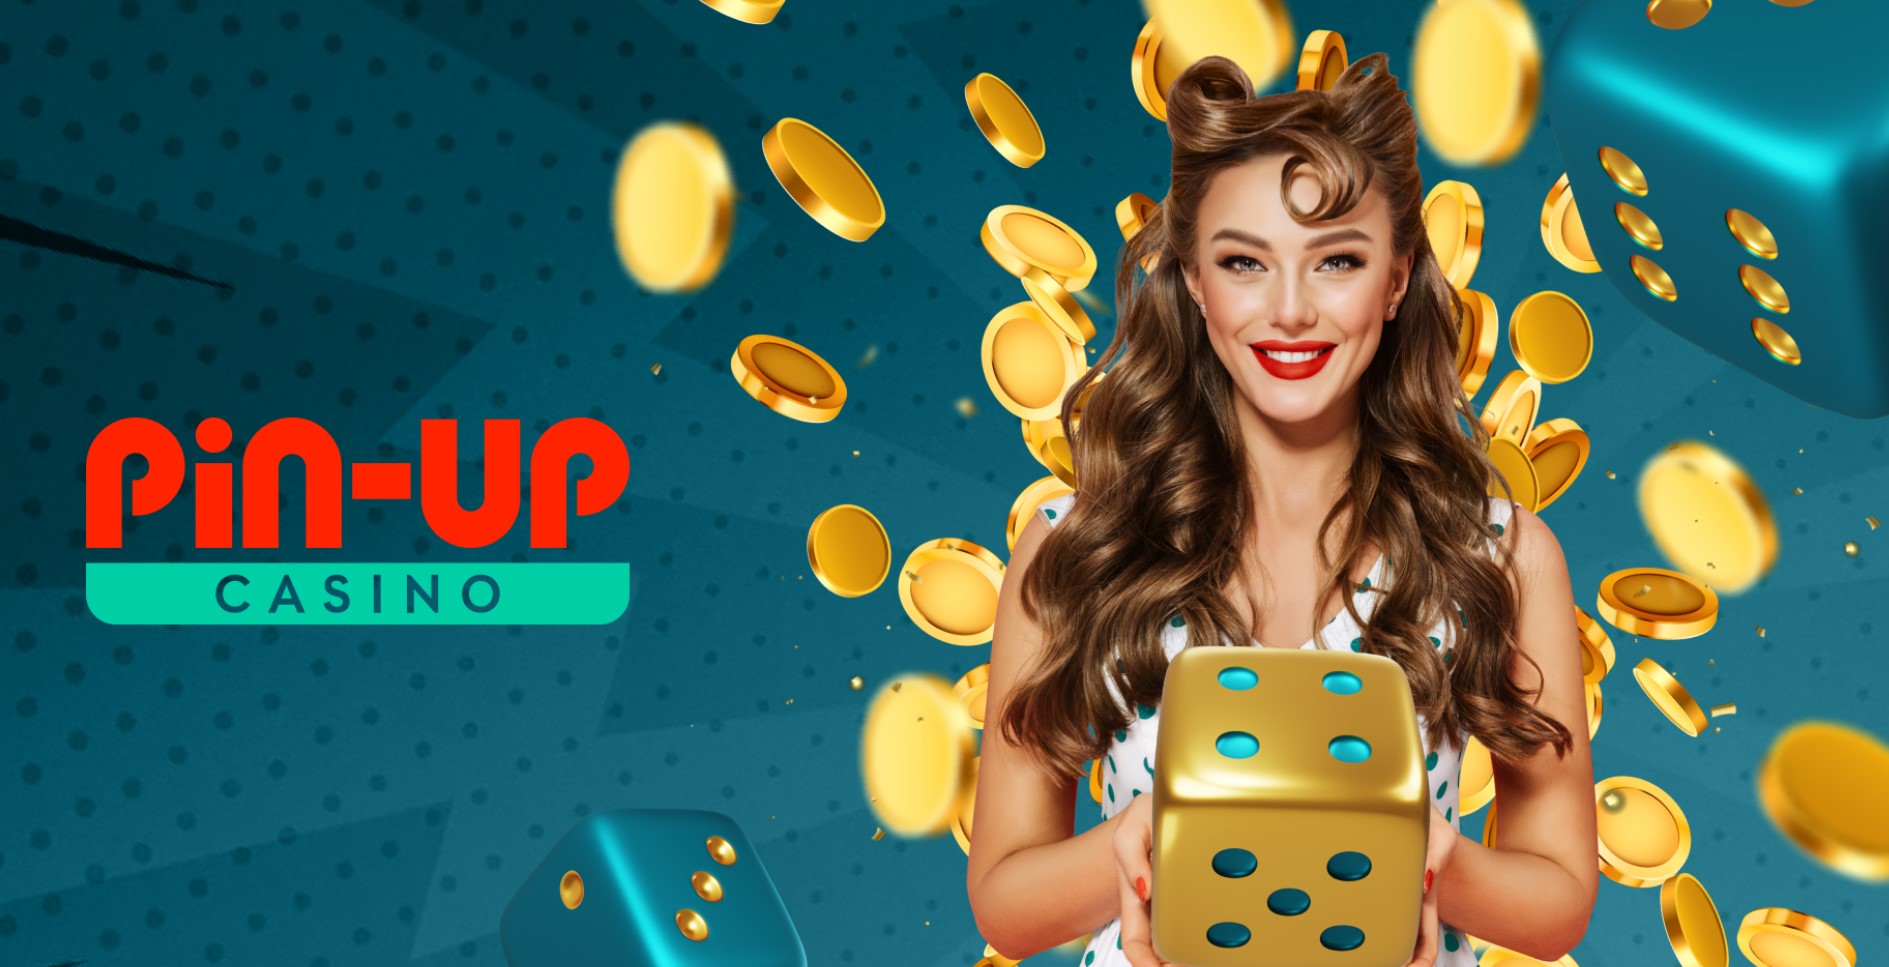 How to contact Pin Up casino customer support